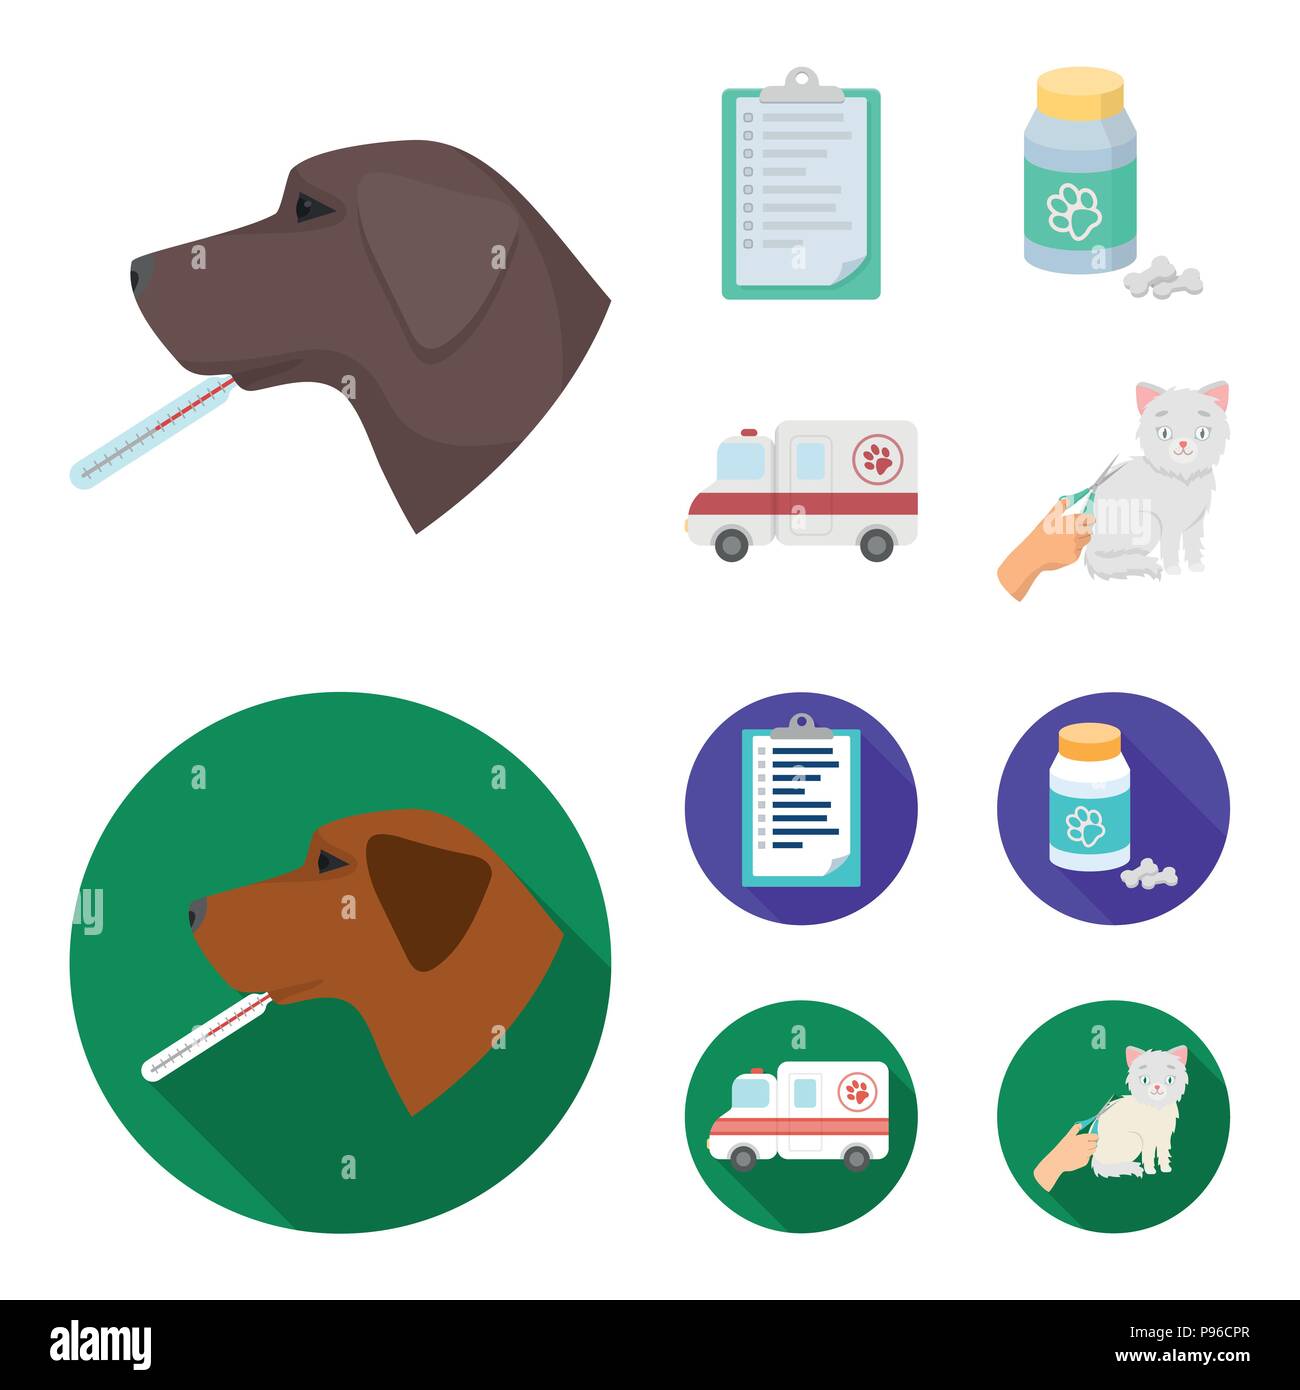 https://c8.alamy.com/comp/P96CPR/hospital-veterinarian-dog-thermometer-vet-clinic-set-collection-icons-in-cartoonflat-style-vector-symbol-stock-illustration-P96CPR.jpg